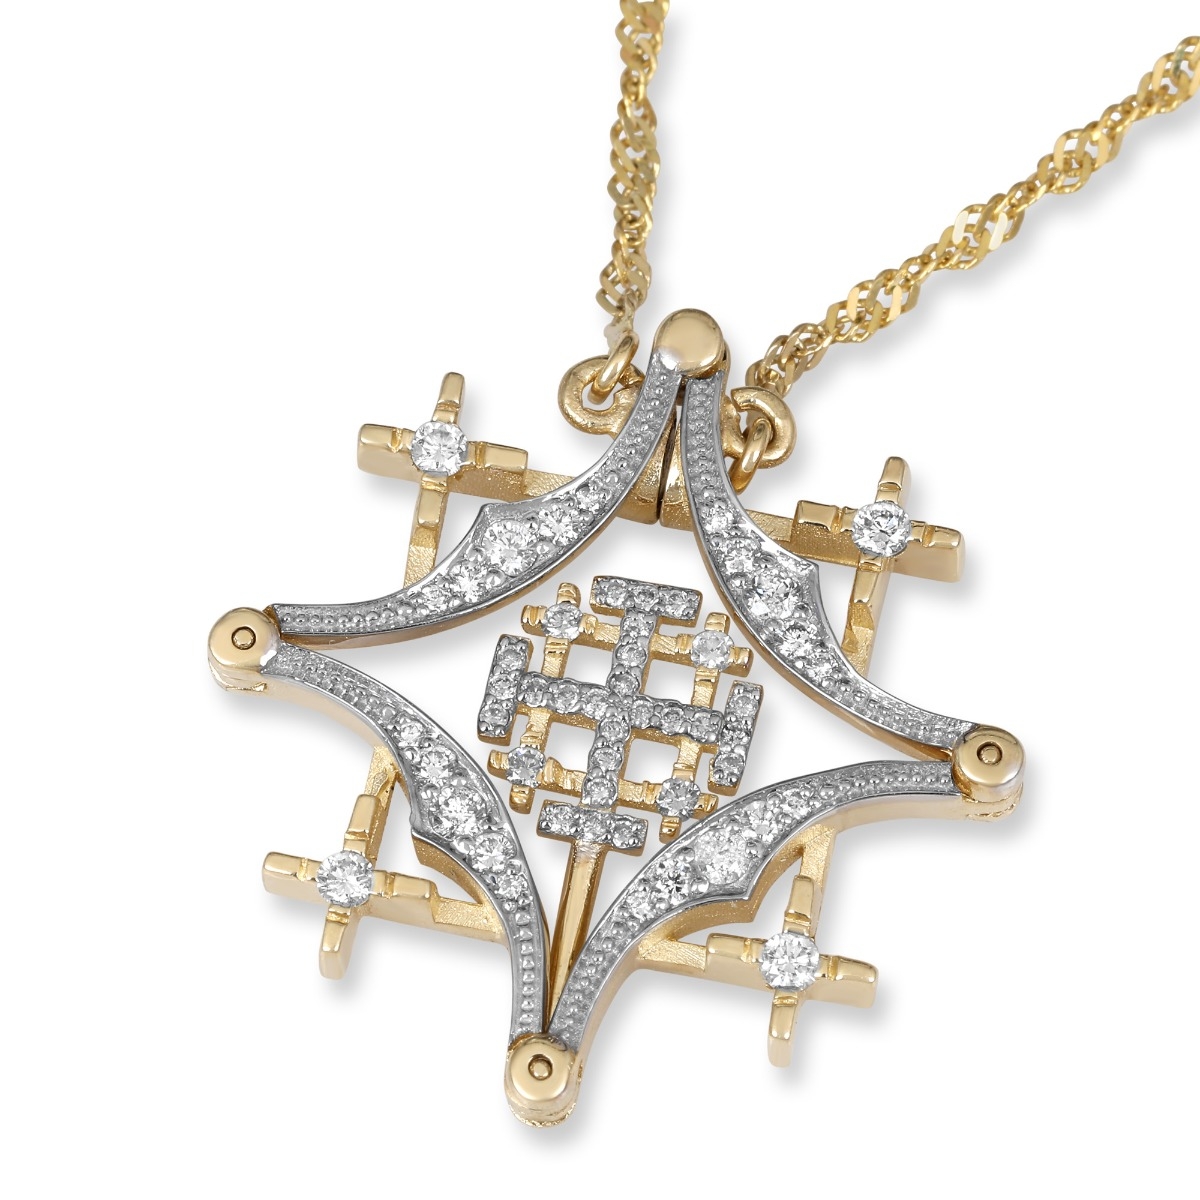 Anbinder Deluxe Two-Tone 14K Yellow and White Gold Magnetic Jerusalem Cross Necklace with Diamonds - 1